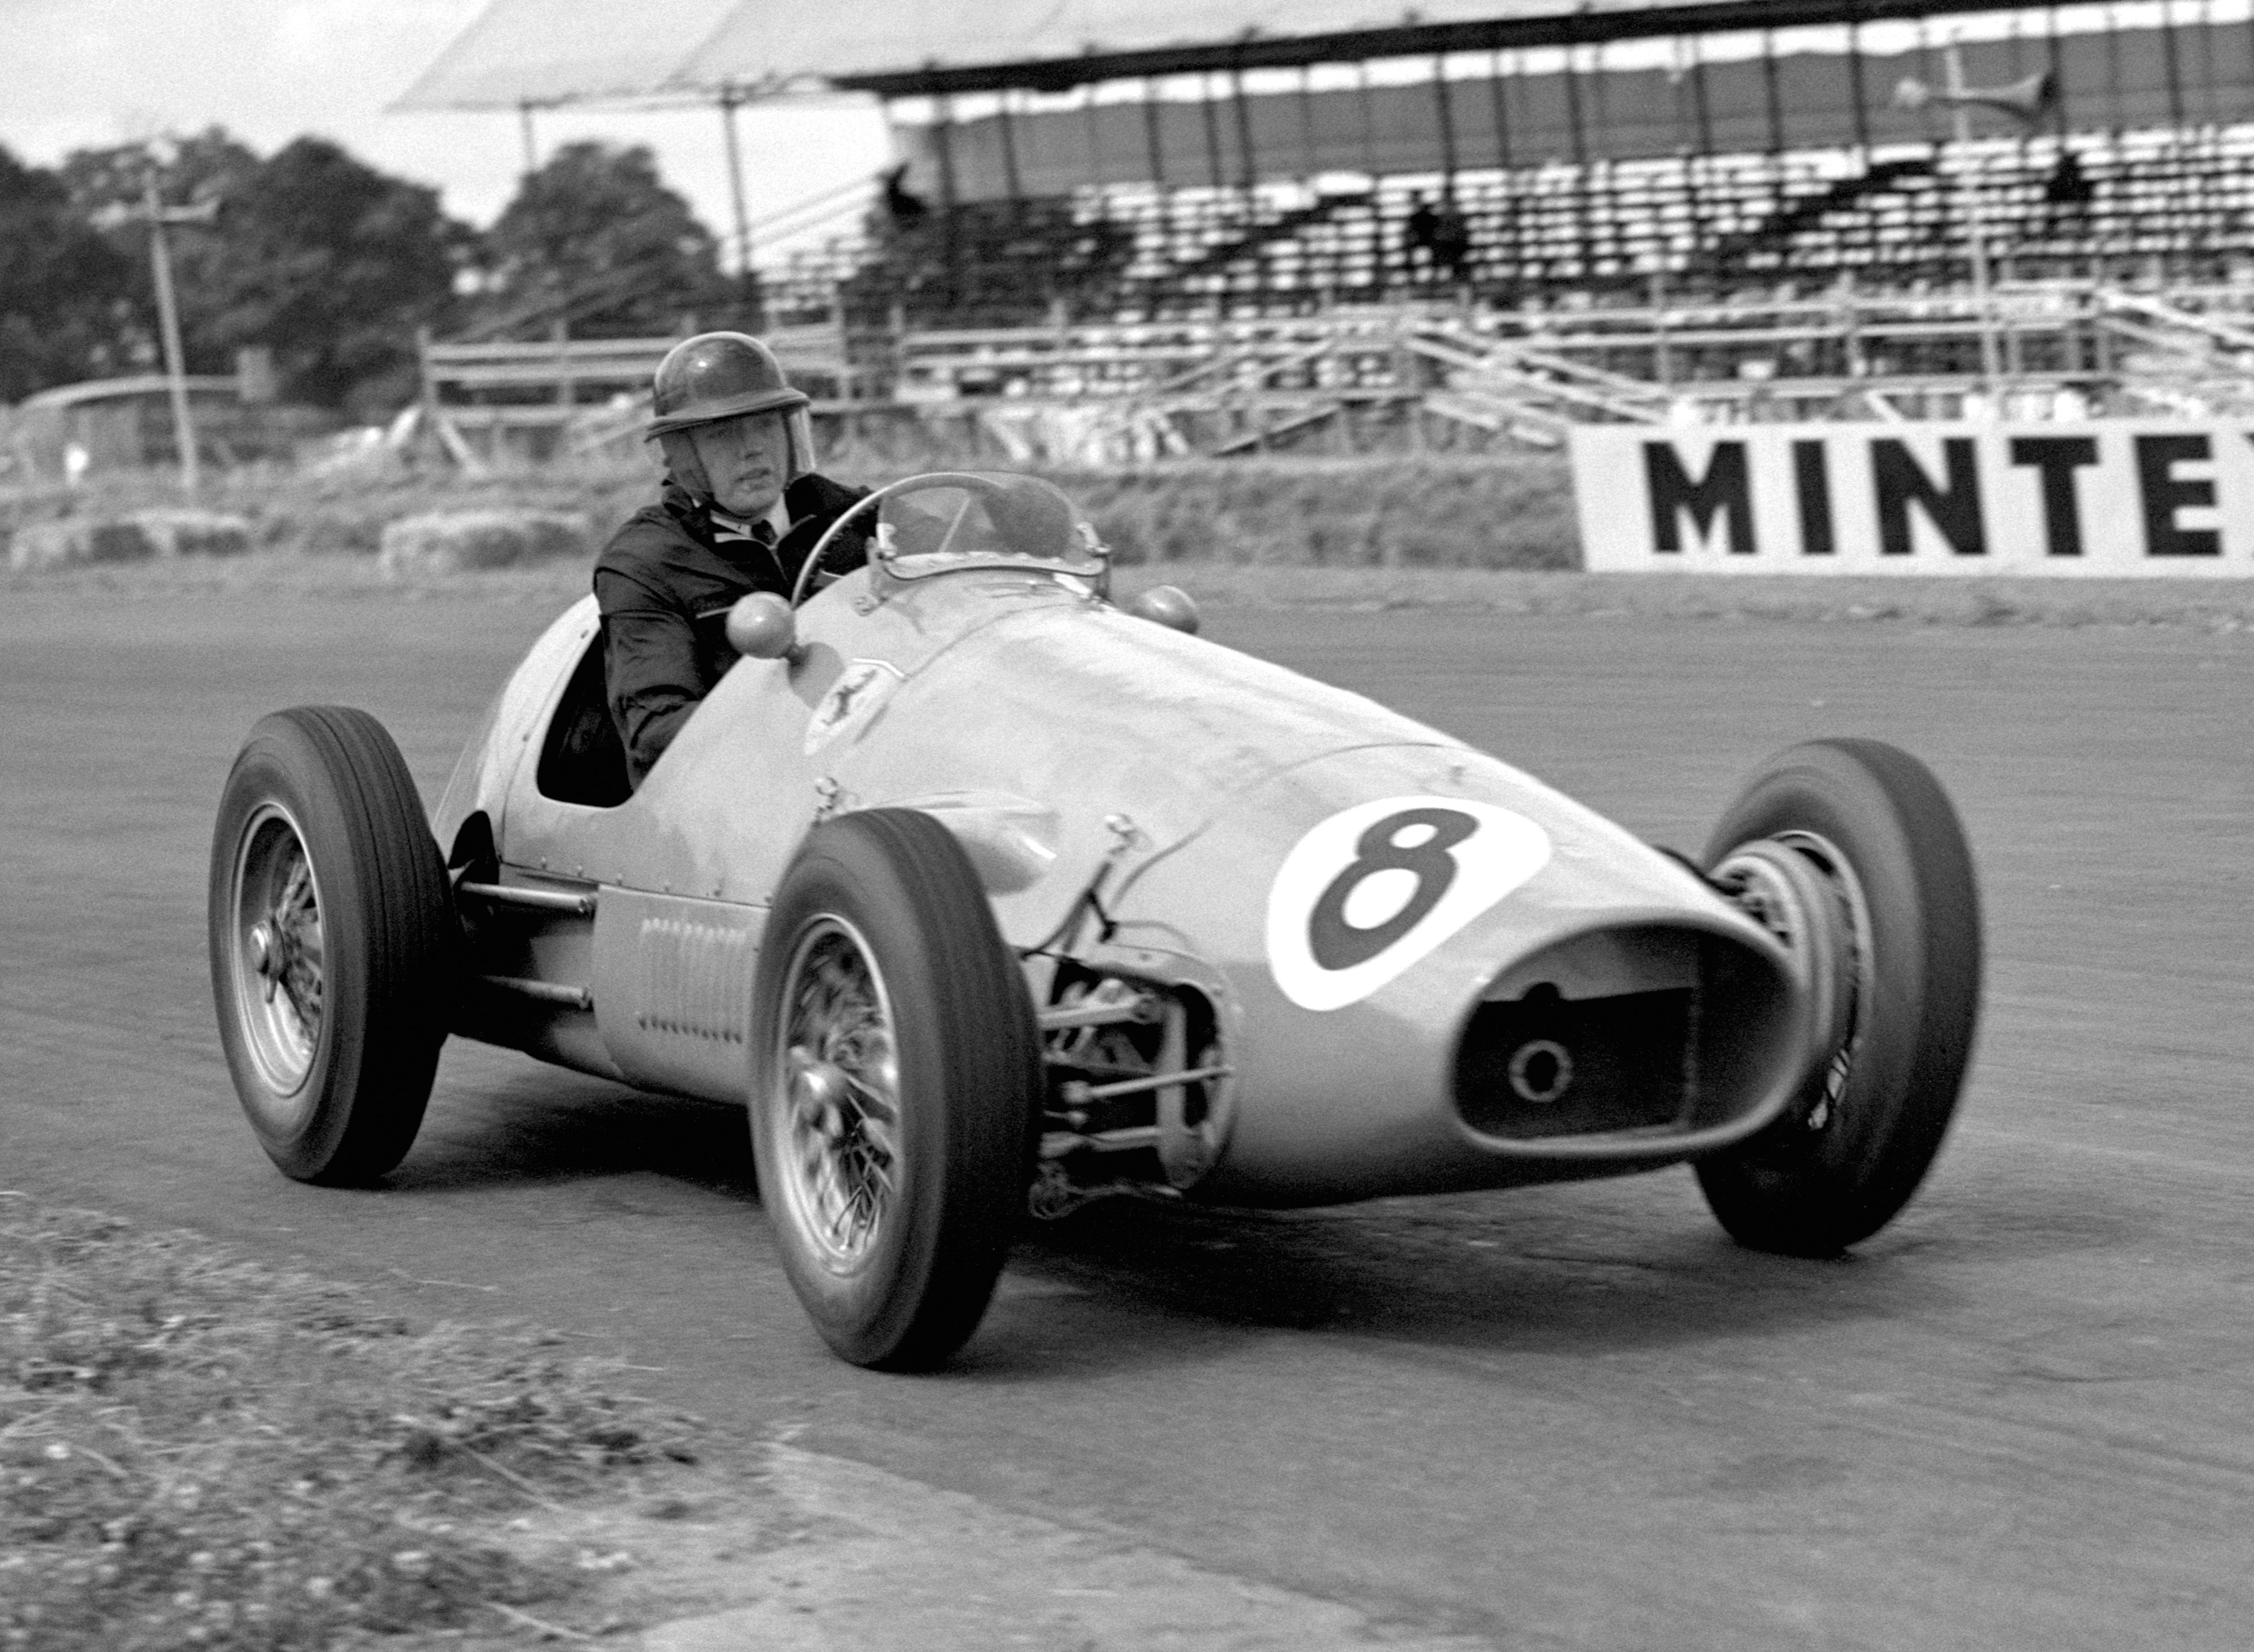 Mike Hawthorn was the first British driver to race in F1 for Ferrari